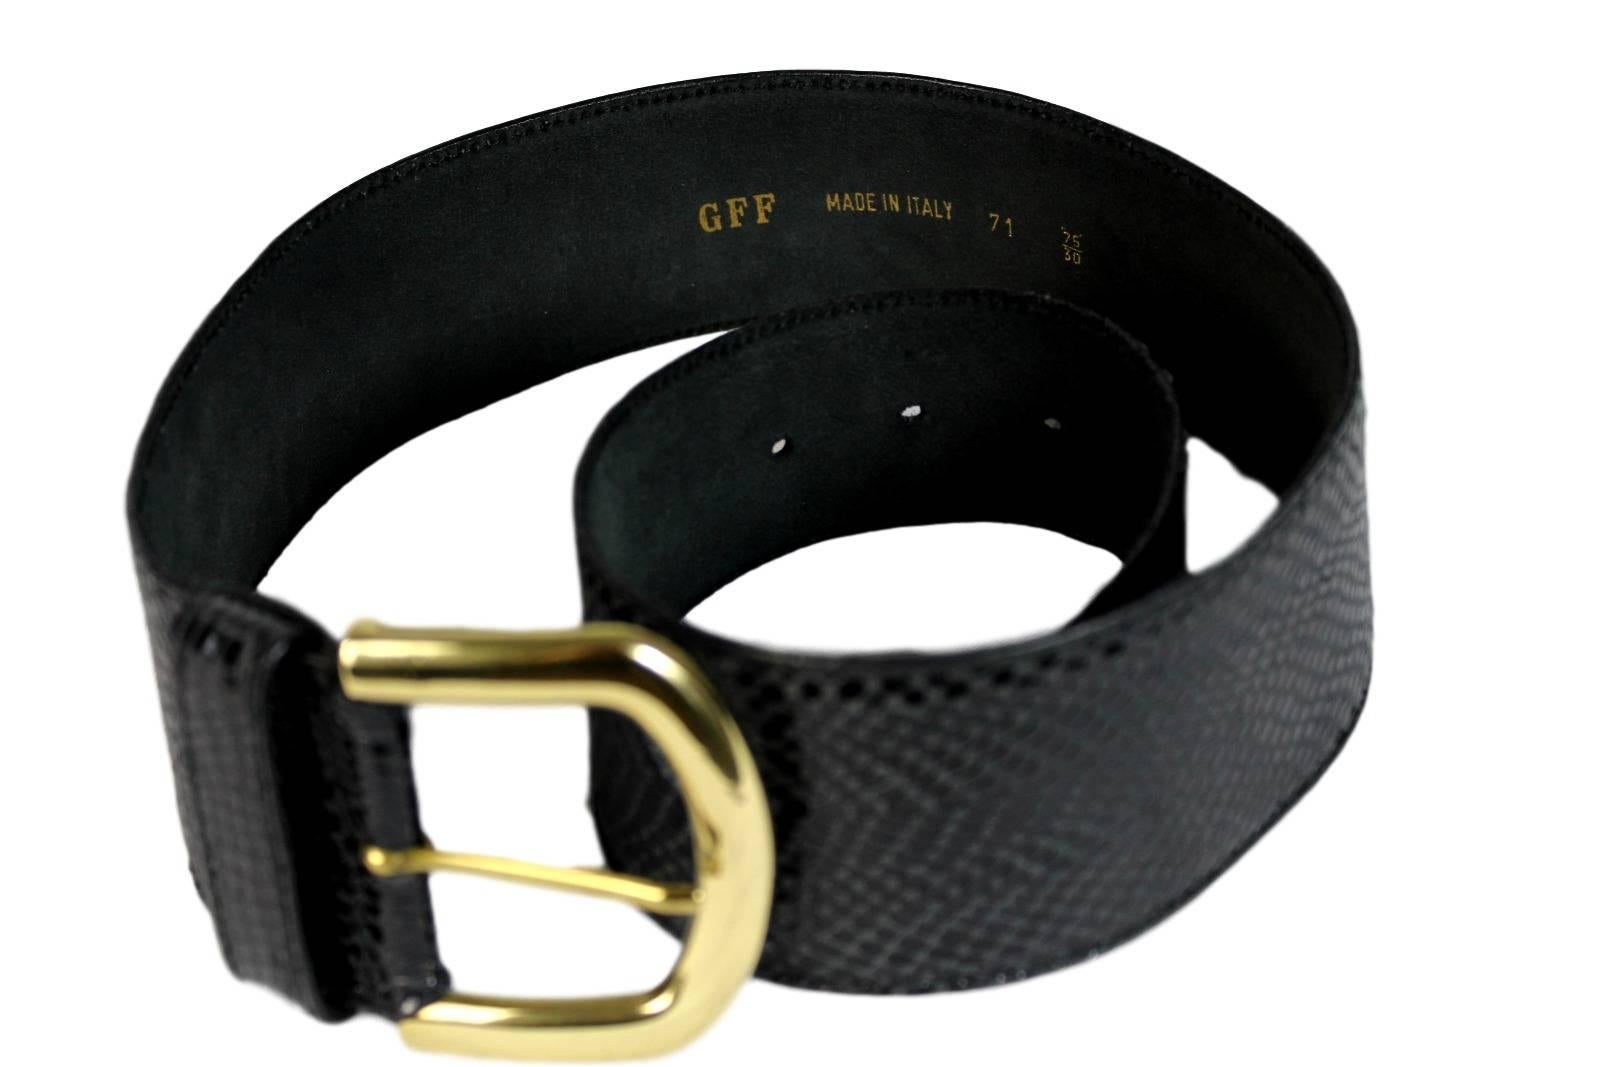 Gianfranco Ferre belt vintage 1980s snakeskin, black buckle golden. The belt has a flared shape, it is not linear, for a better fit. Excellent vintage. conditions. Size 75/30

Fabrication: Snakeskin
Meausurements
Lenght: 85 cm
Width: 6